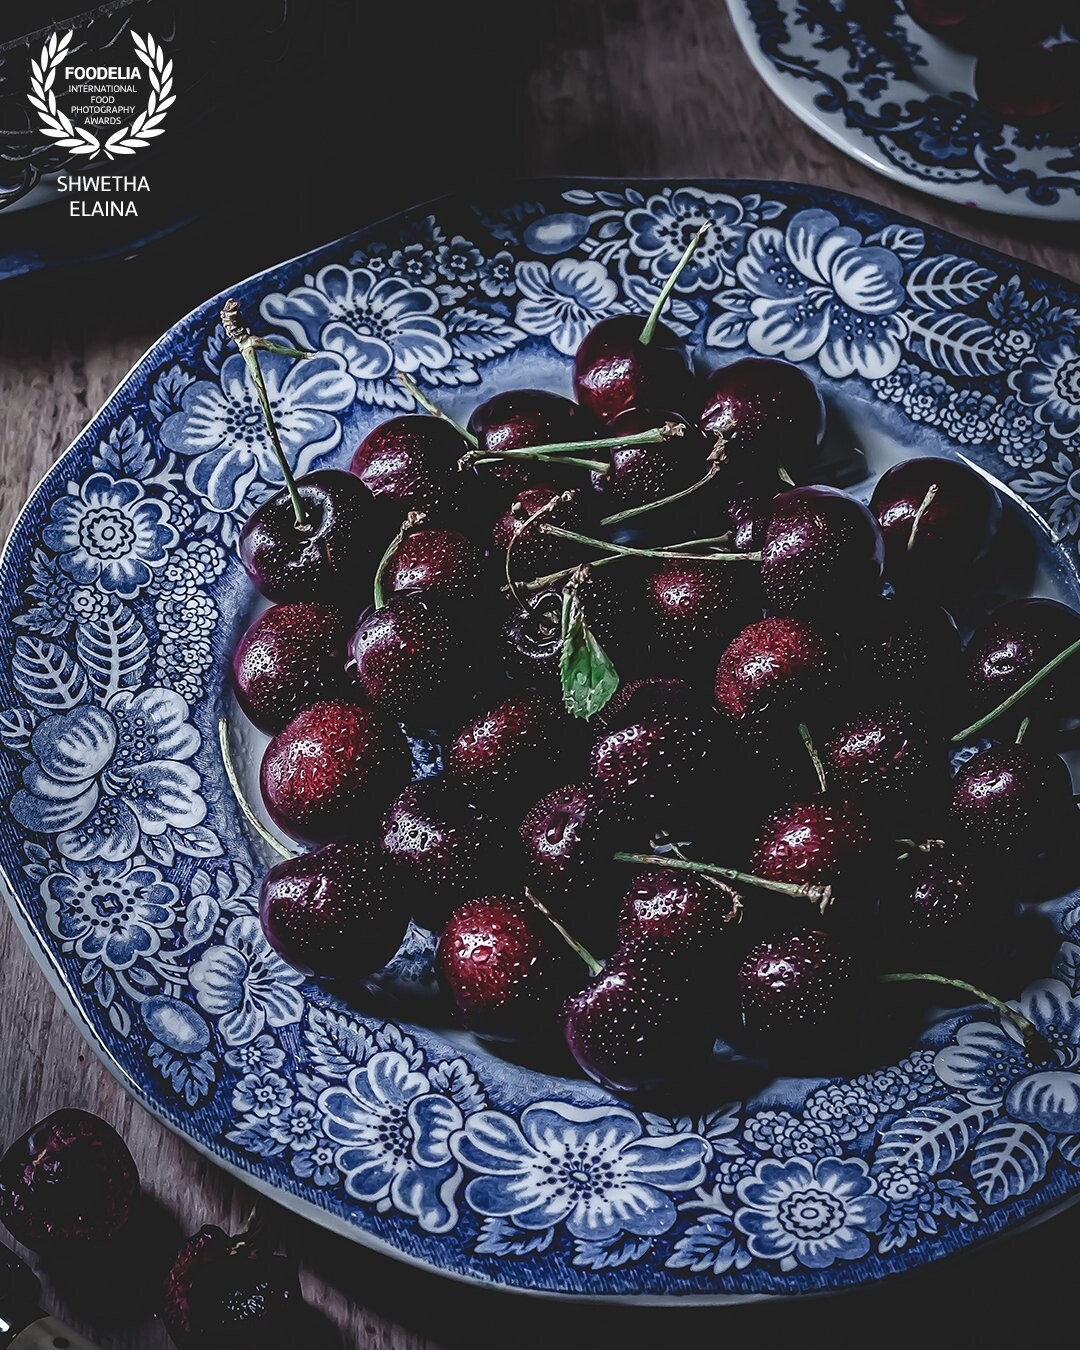 An attempt at learning color theory in food using these gorgeous sweet cherries washed under a kitchen sink faucet sprayer.  Learning to make intentional color choices in the composition of the scene, by following the color wheel.